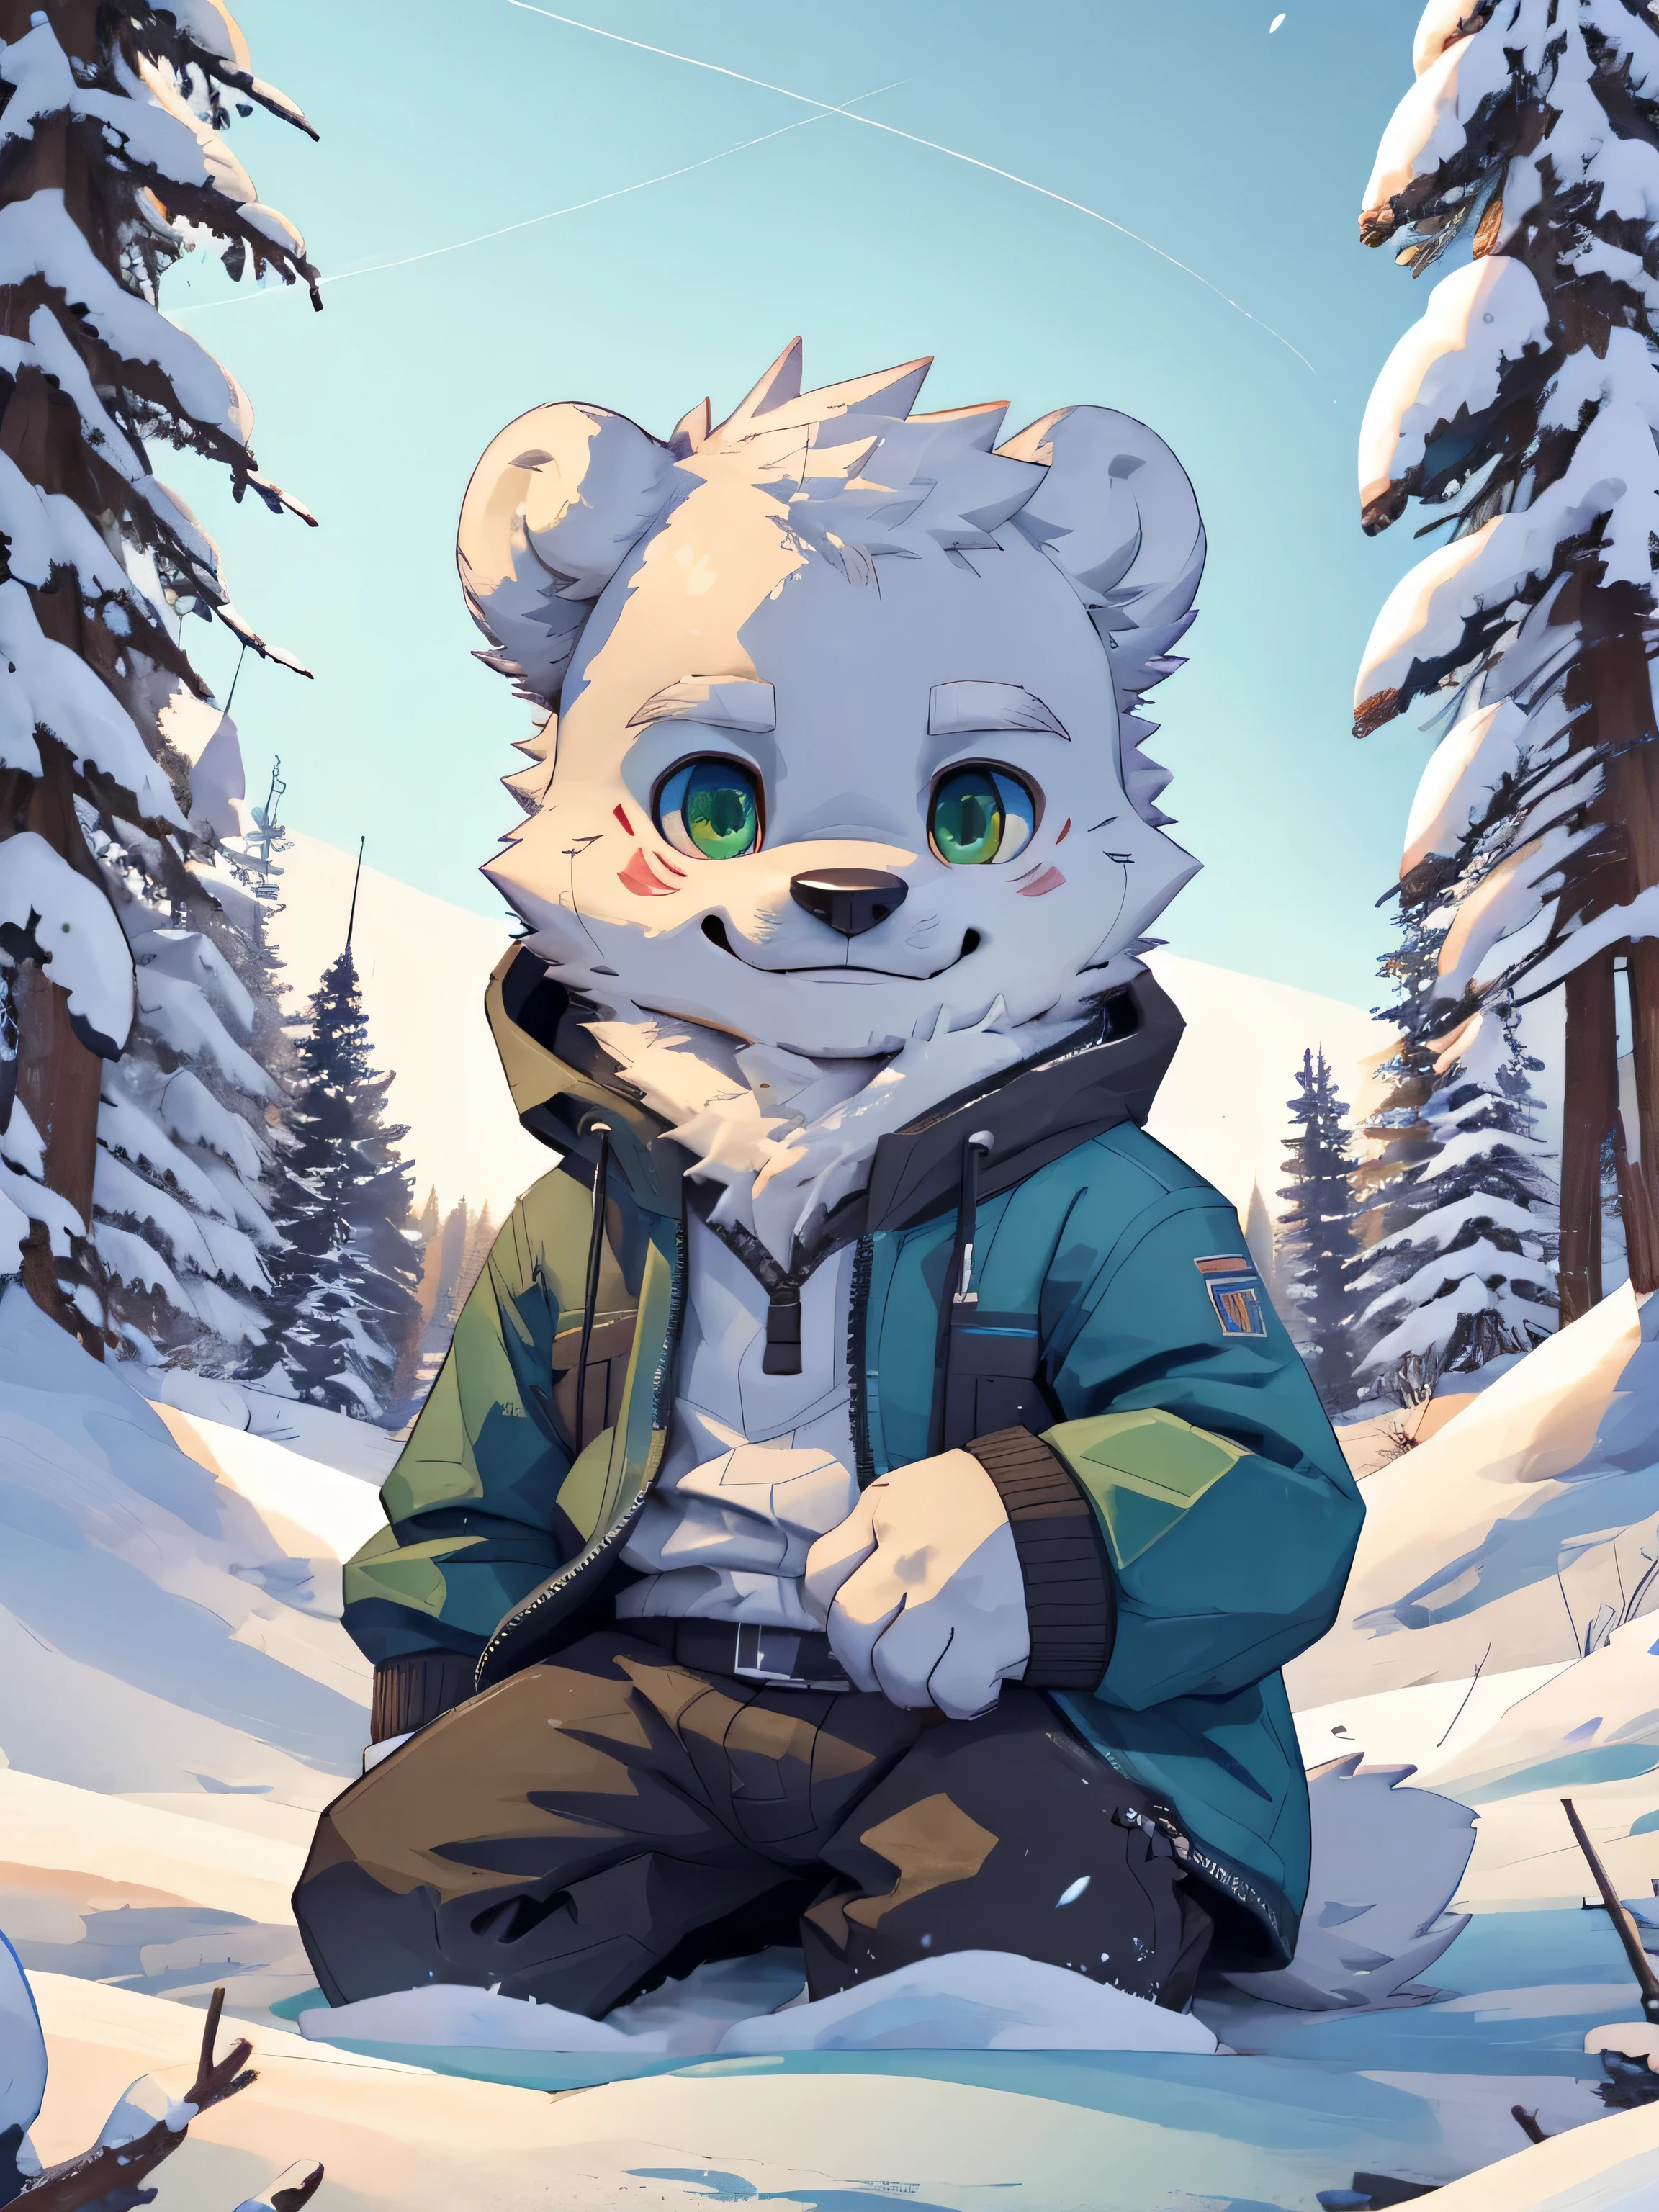 Furry again,alone,Shota,arctic bear,emerald green eyes(Realistic and accurate eye details),bounce,Wear snow skiing clothes.,Sitting in a pile of snow under a pine tree,It&#39;s snowing,evening,Yeonsaeng,HDR,4k,chibi